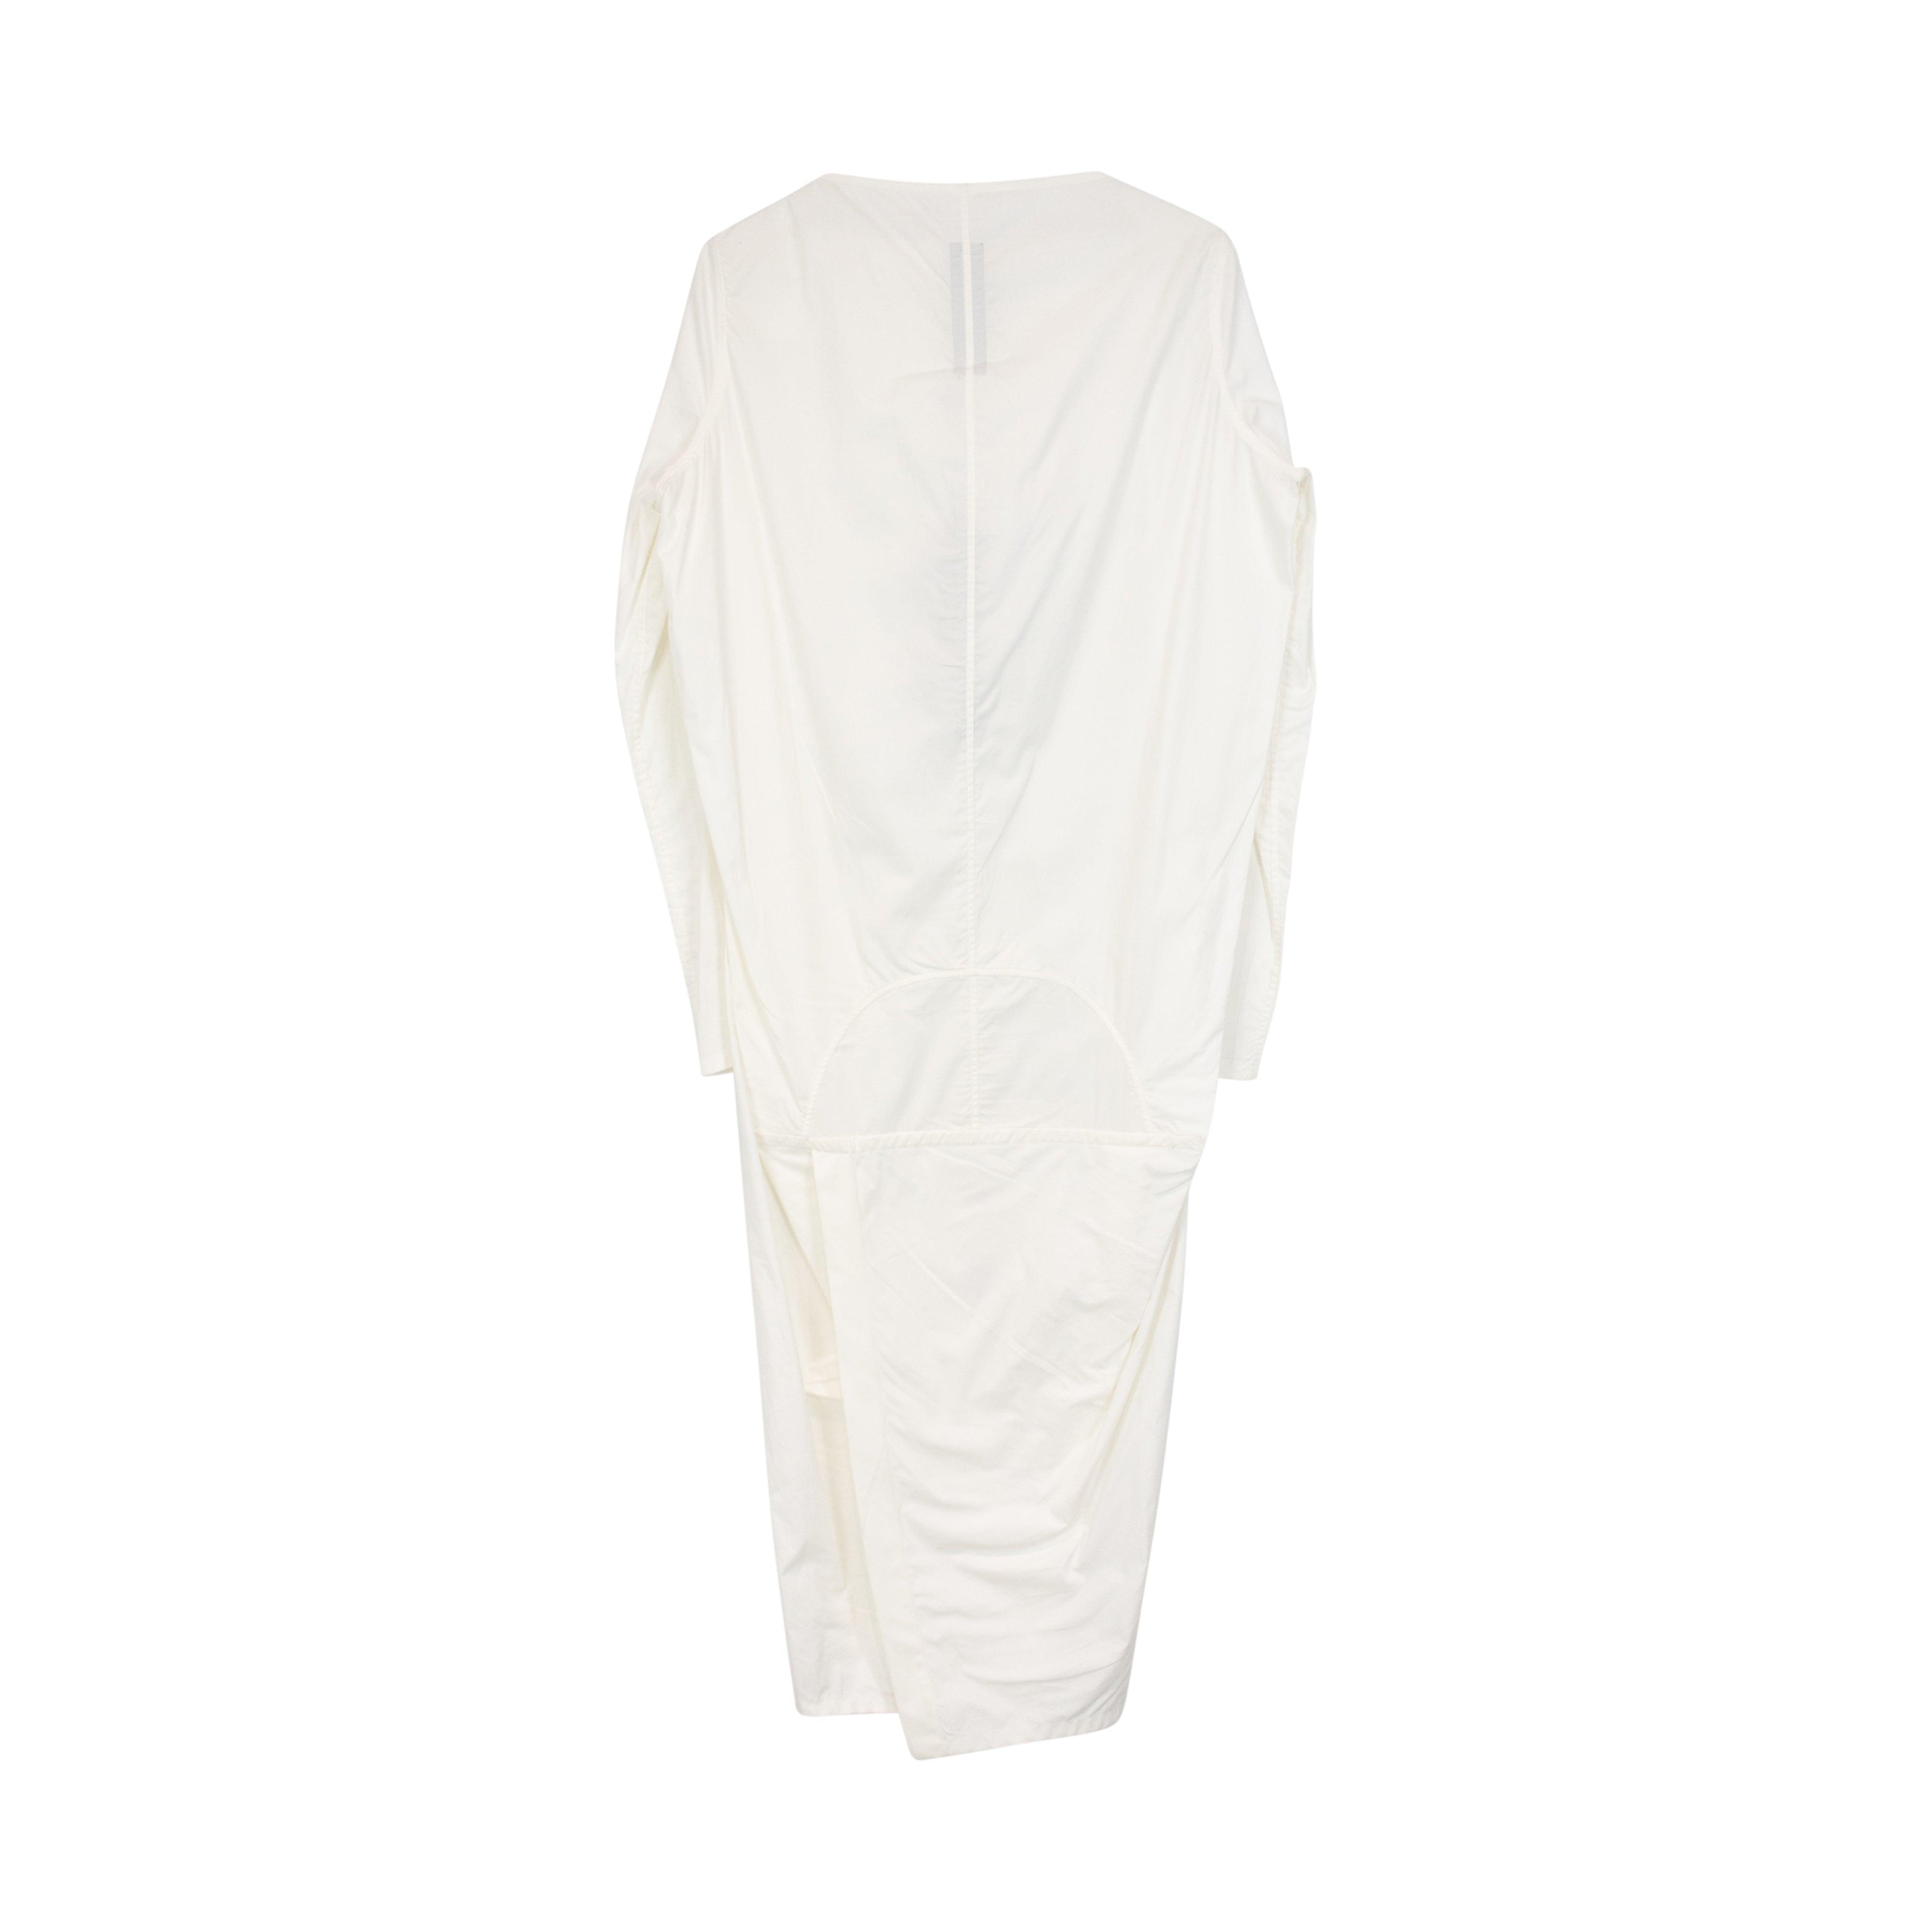 Rick Owens 'Tangier' Dress - 44 - Fashionably Yours